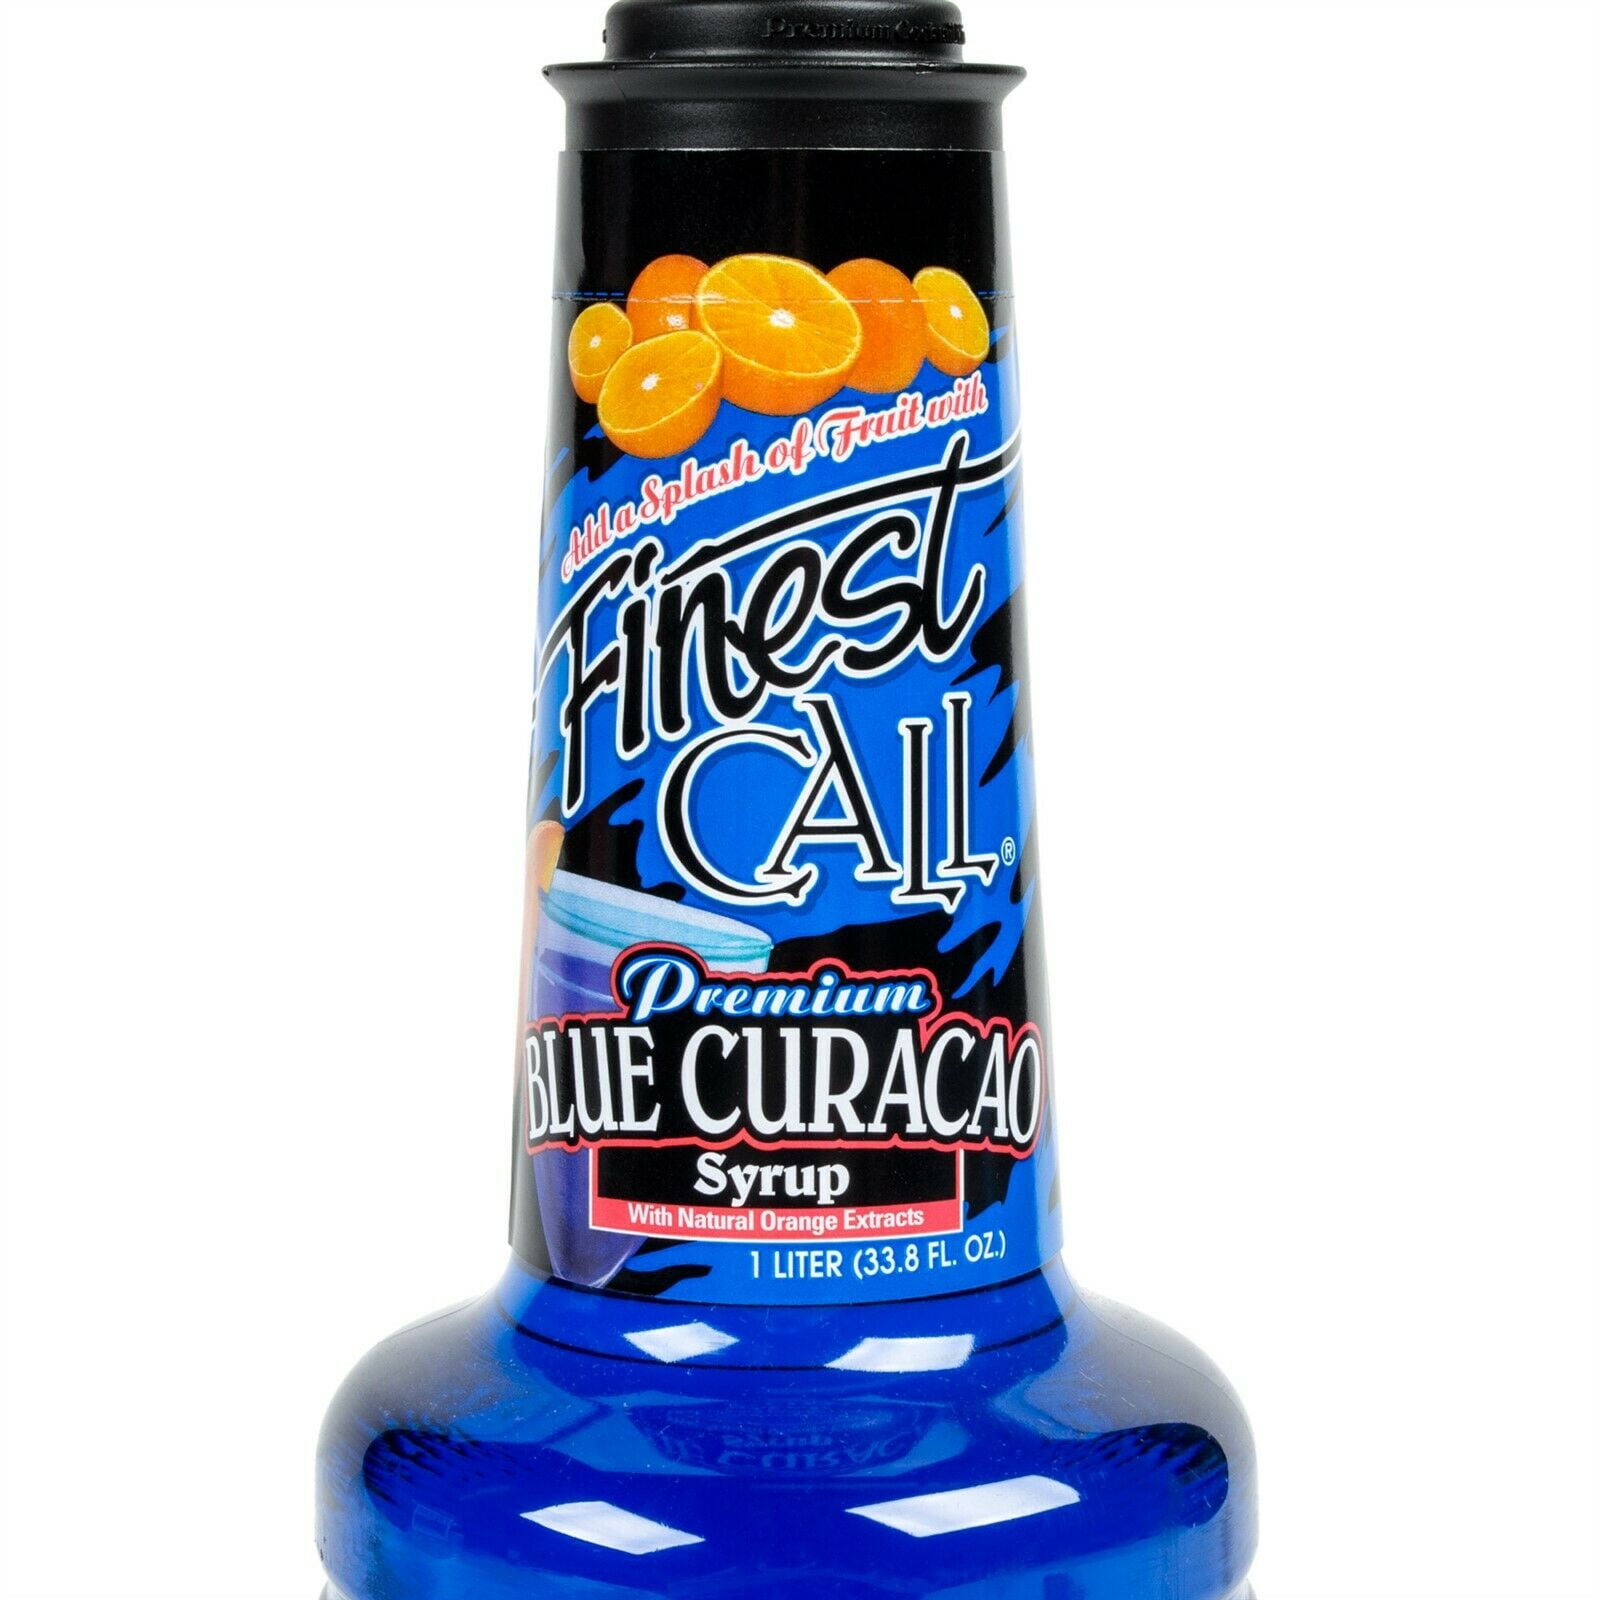 Finest Call Premium Blue Curacao Syrup Drink Mixer – Louisiana Pantry